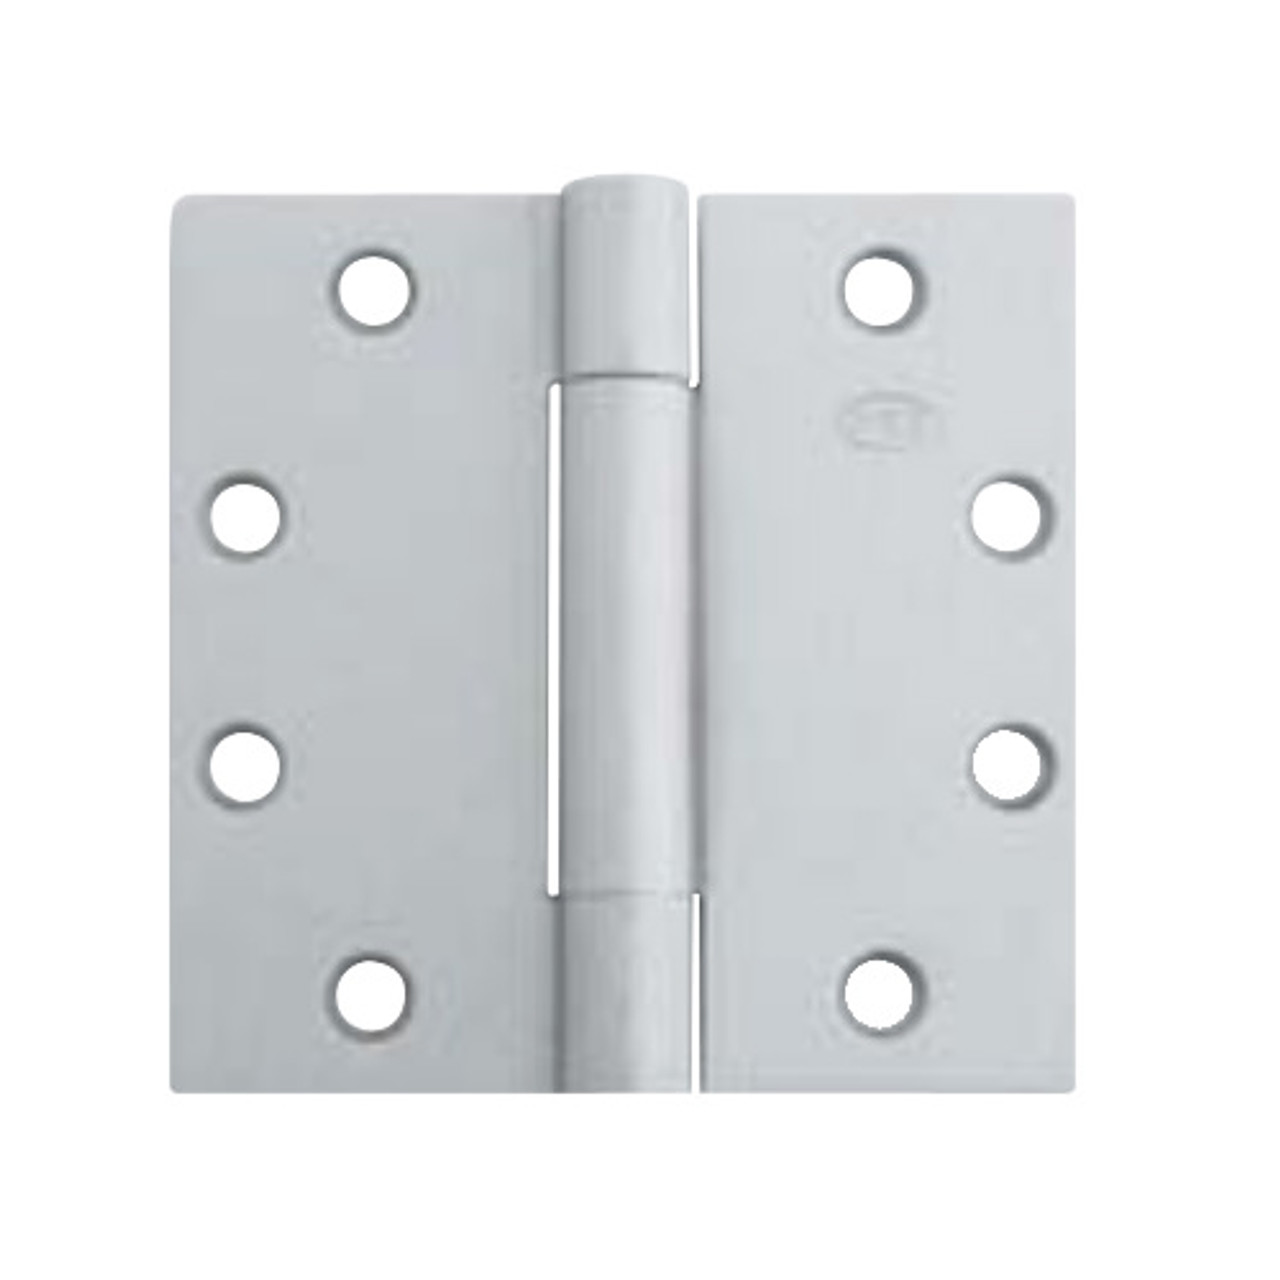 3CB1-4-5x4-5-600-TW4 IVES 3 Knuckle Concealed Bearing Full Mortise Hinge with Electric Thru-Wire in Primed for Paint - Steel